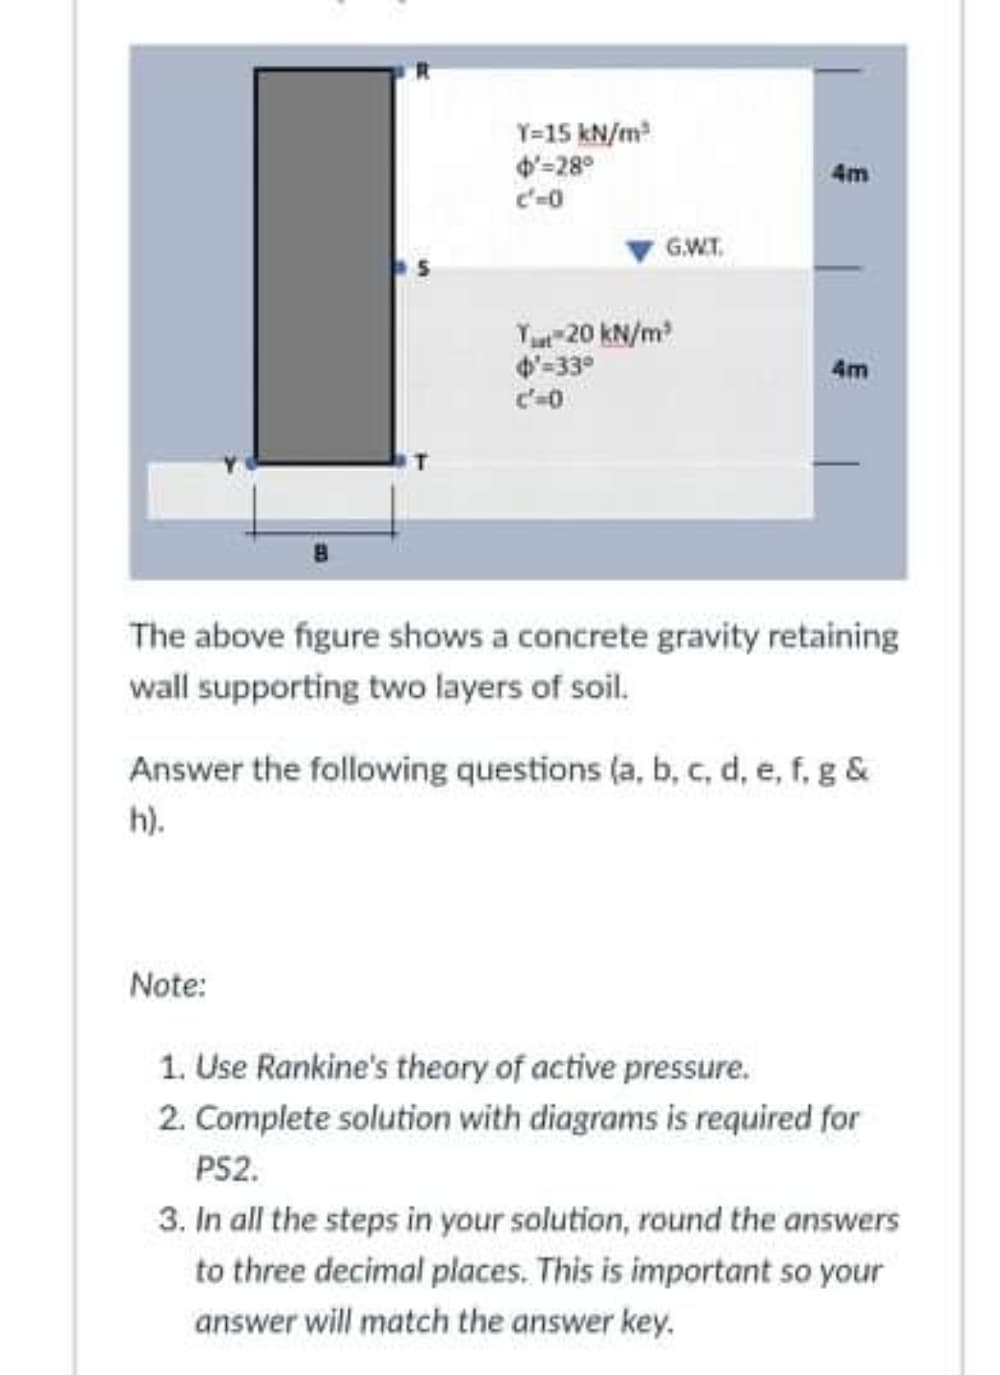 Y=15 kN/m
4'=28°
c'-0
4m
G.W.T.
Yu 20 kN/m
4'-33°
4m
The above figure shows a concrete gravity retaining
wall supporting two layers of soil.
Answer the following questions (a, b, c, d, e, f, g &
h).
Note:
1. Use Rankine's theory of active pressure.
2. Complete solution with diagrams is required for
PS2.
3. In all the steps in your solution, round the answers
to three decimal places. This is important so your
answer will match the answer key.
